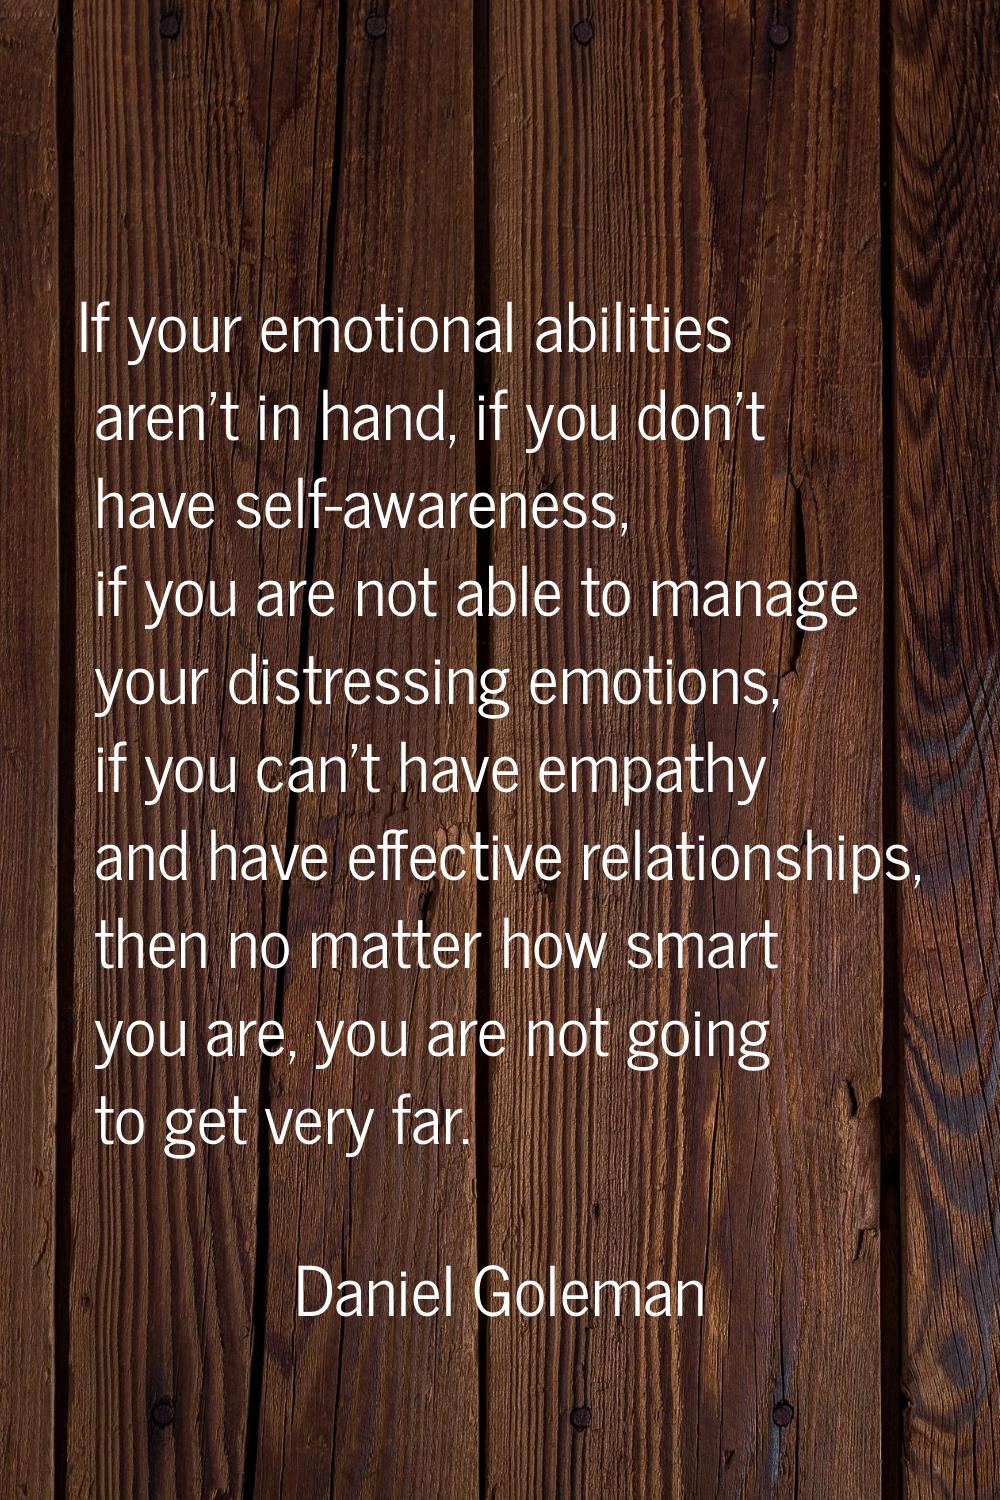 If your emotional abilities aren't in hand, if you don't have self-awareness, if you are not able t